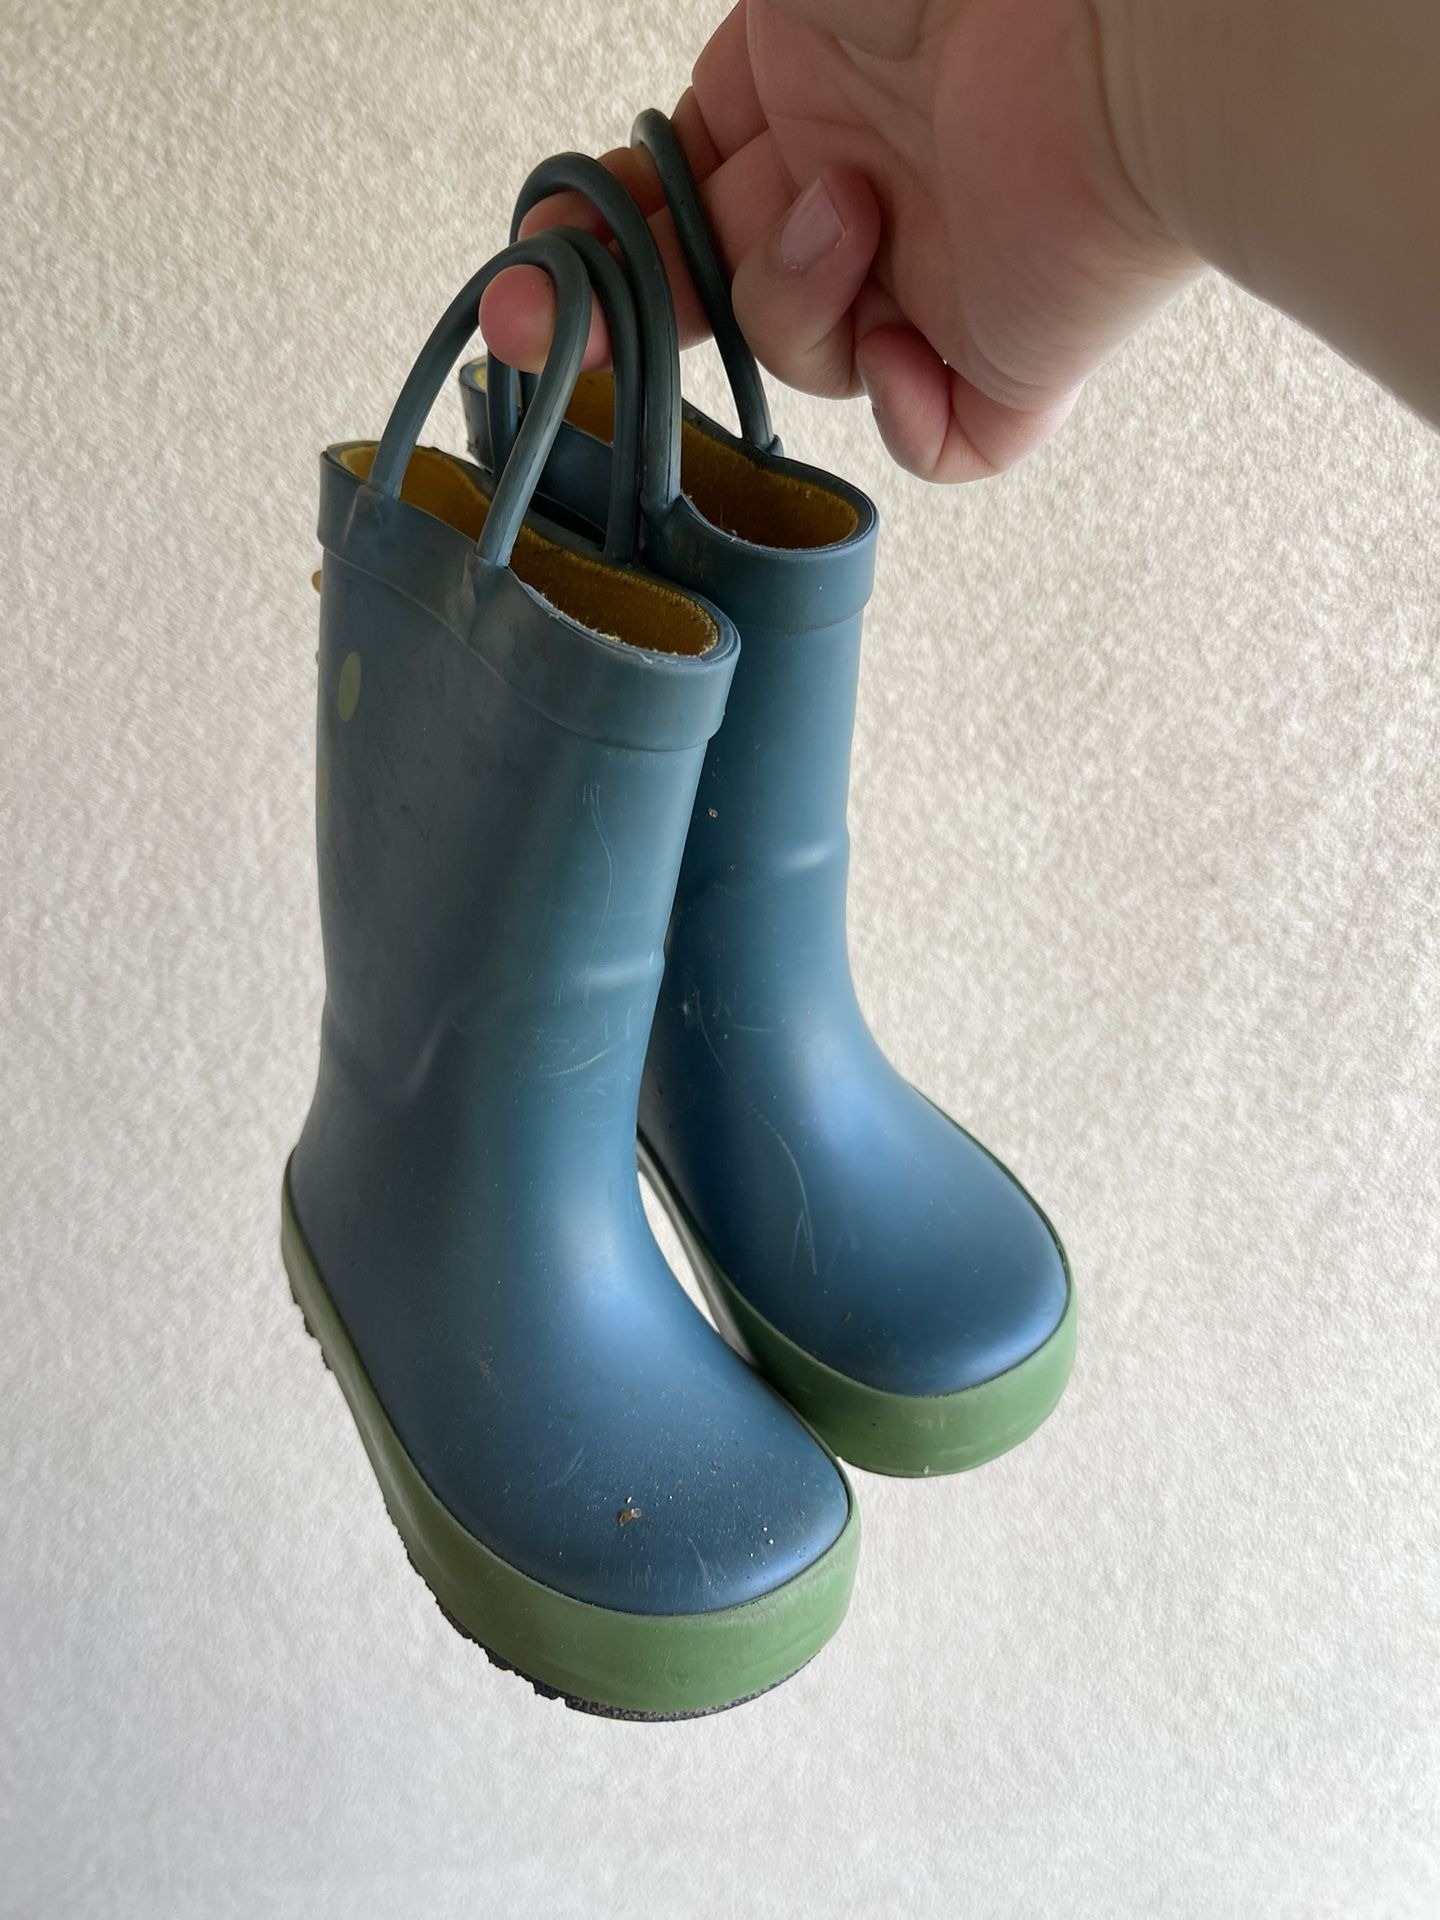 Toddler Rain Boots Size 6 